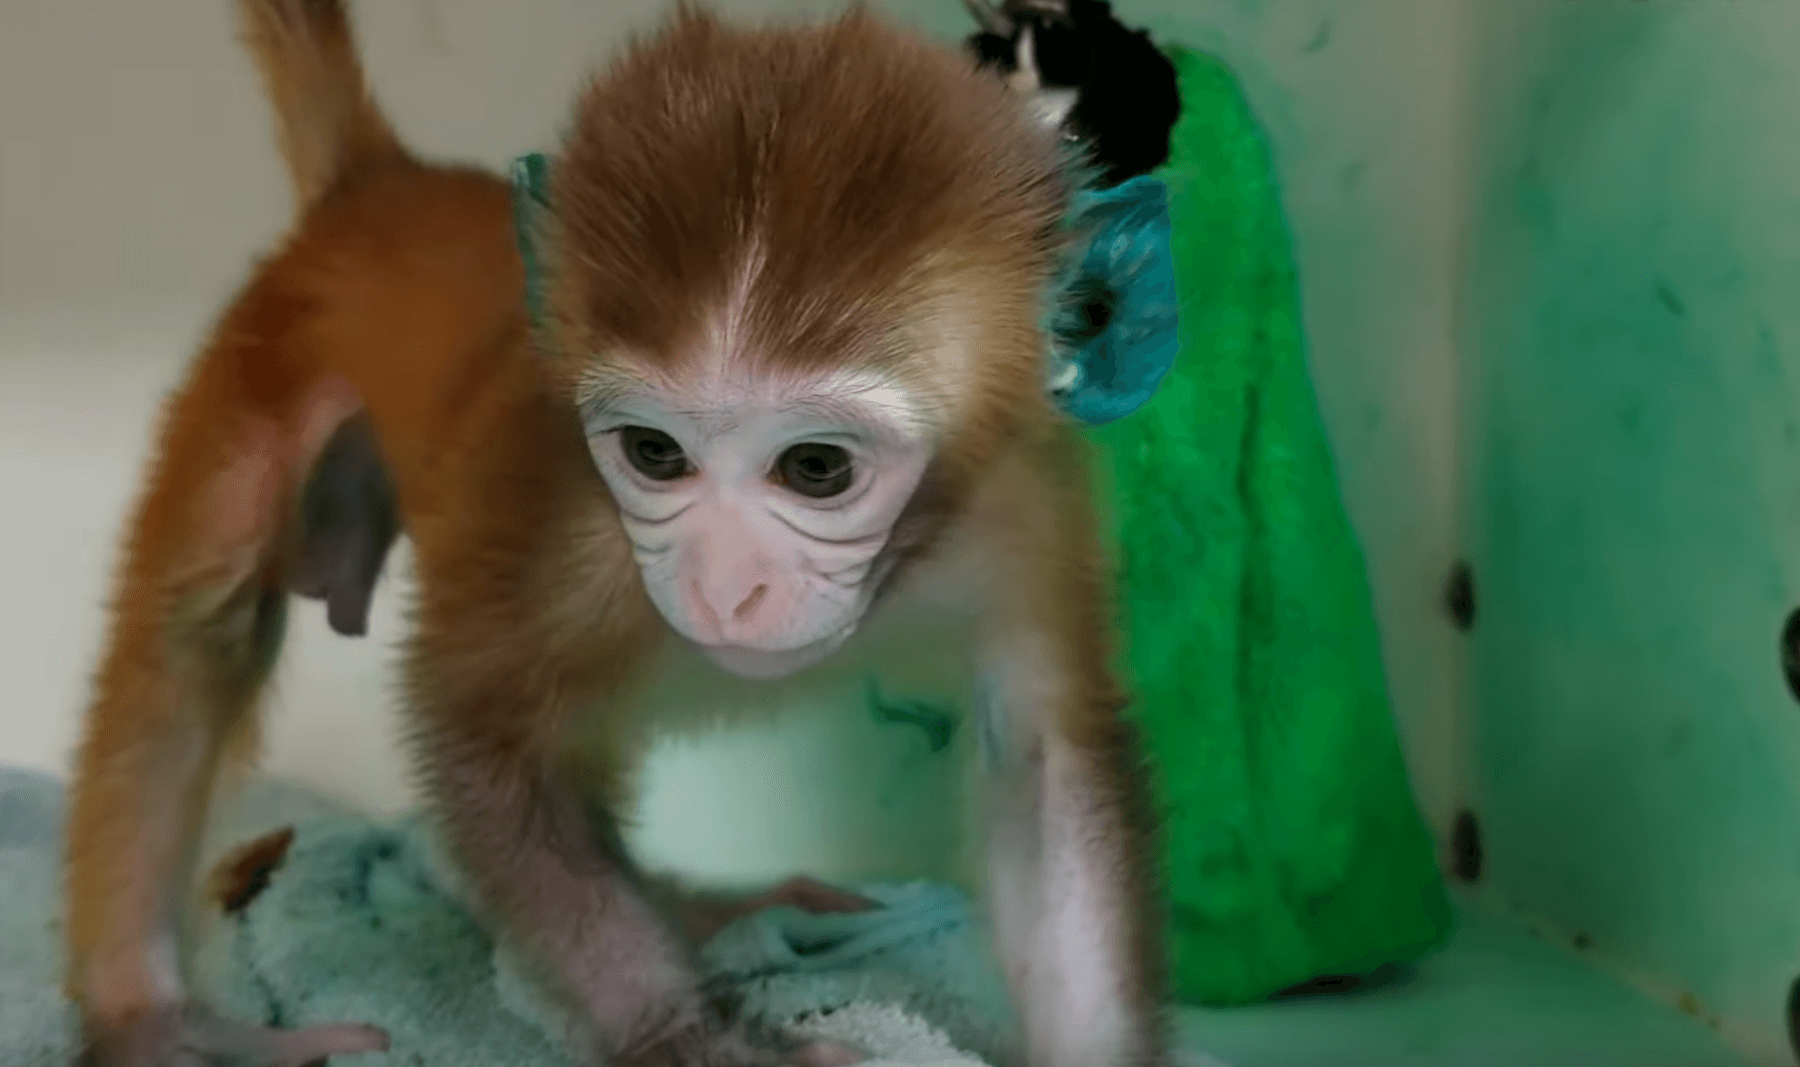 https://investigaciones.petalatino.com/wp-content/uploads/2021/01/VIV-Wisconsin-National-Primate-Research-Center-WNPRC-NPRC-infant-monkey-baby-primate-tattoo-ink-ears-VS.png